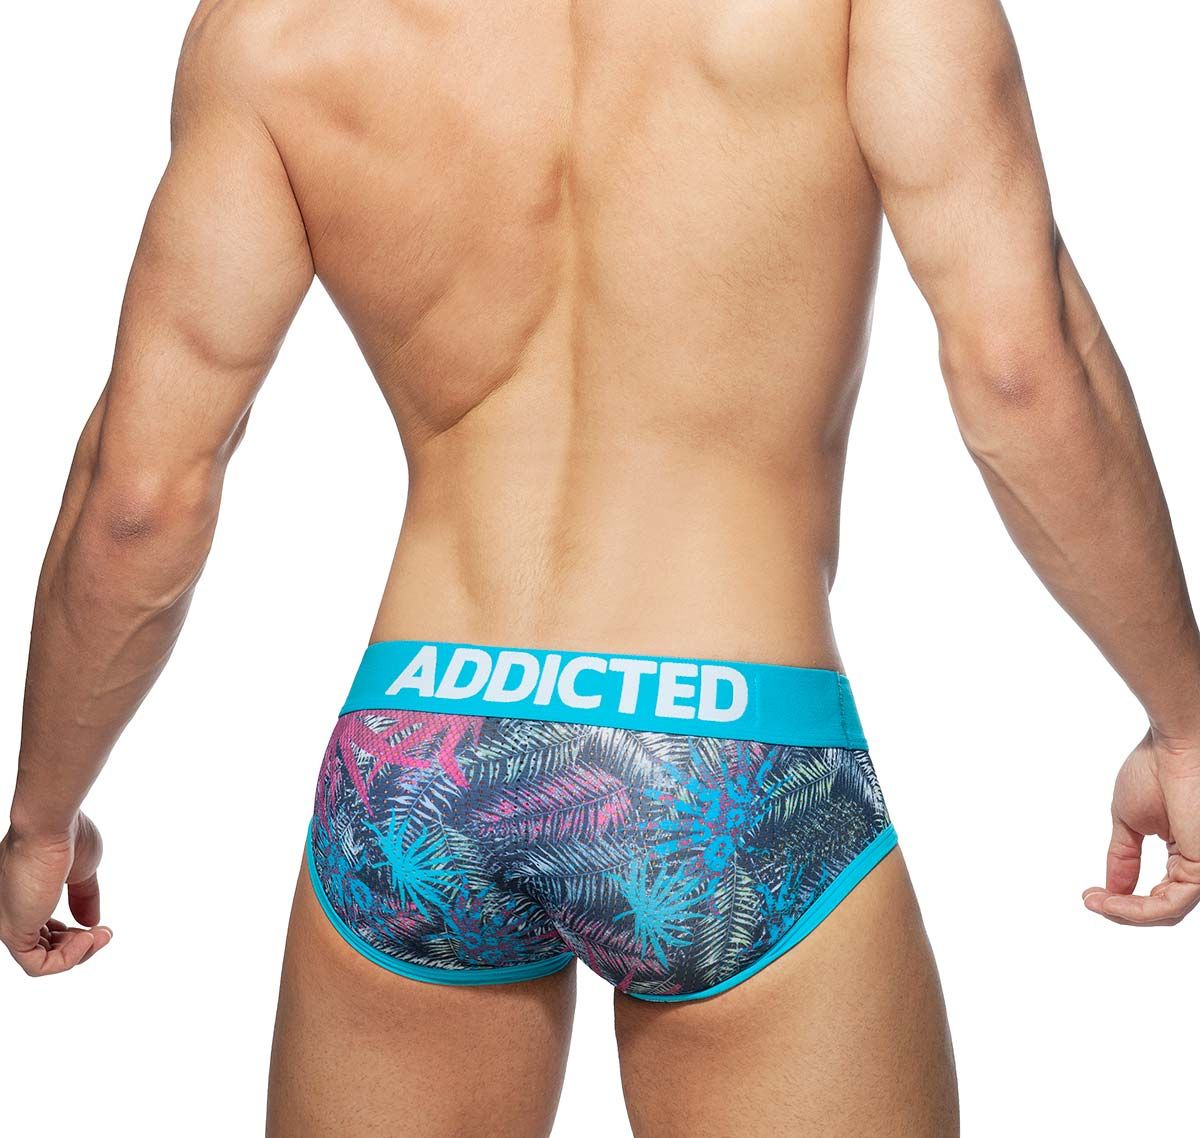 Addicted Pack de 3 Slips 3 PACK TROPICAL MESH BRIEF PUSH UP, AD889P, multicolor